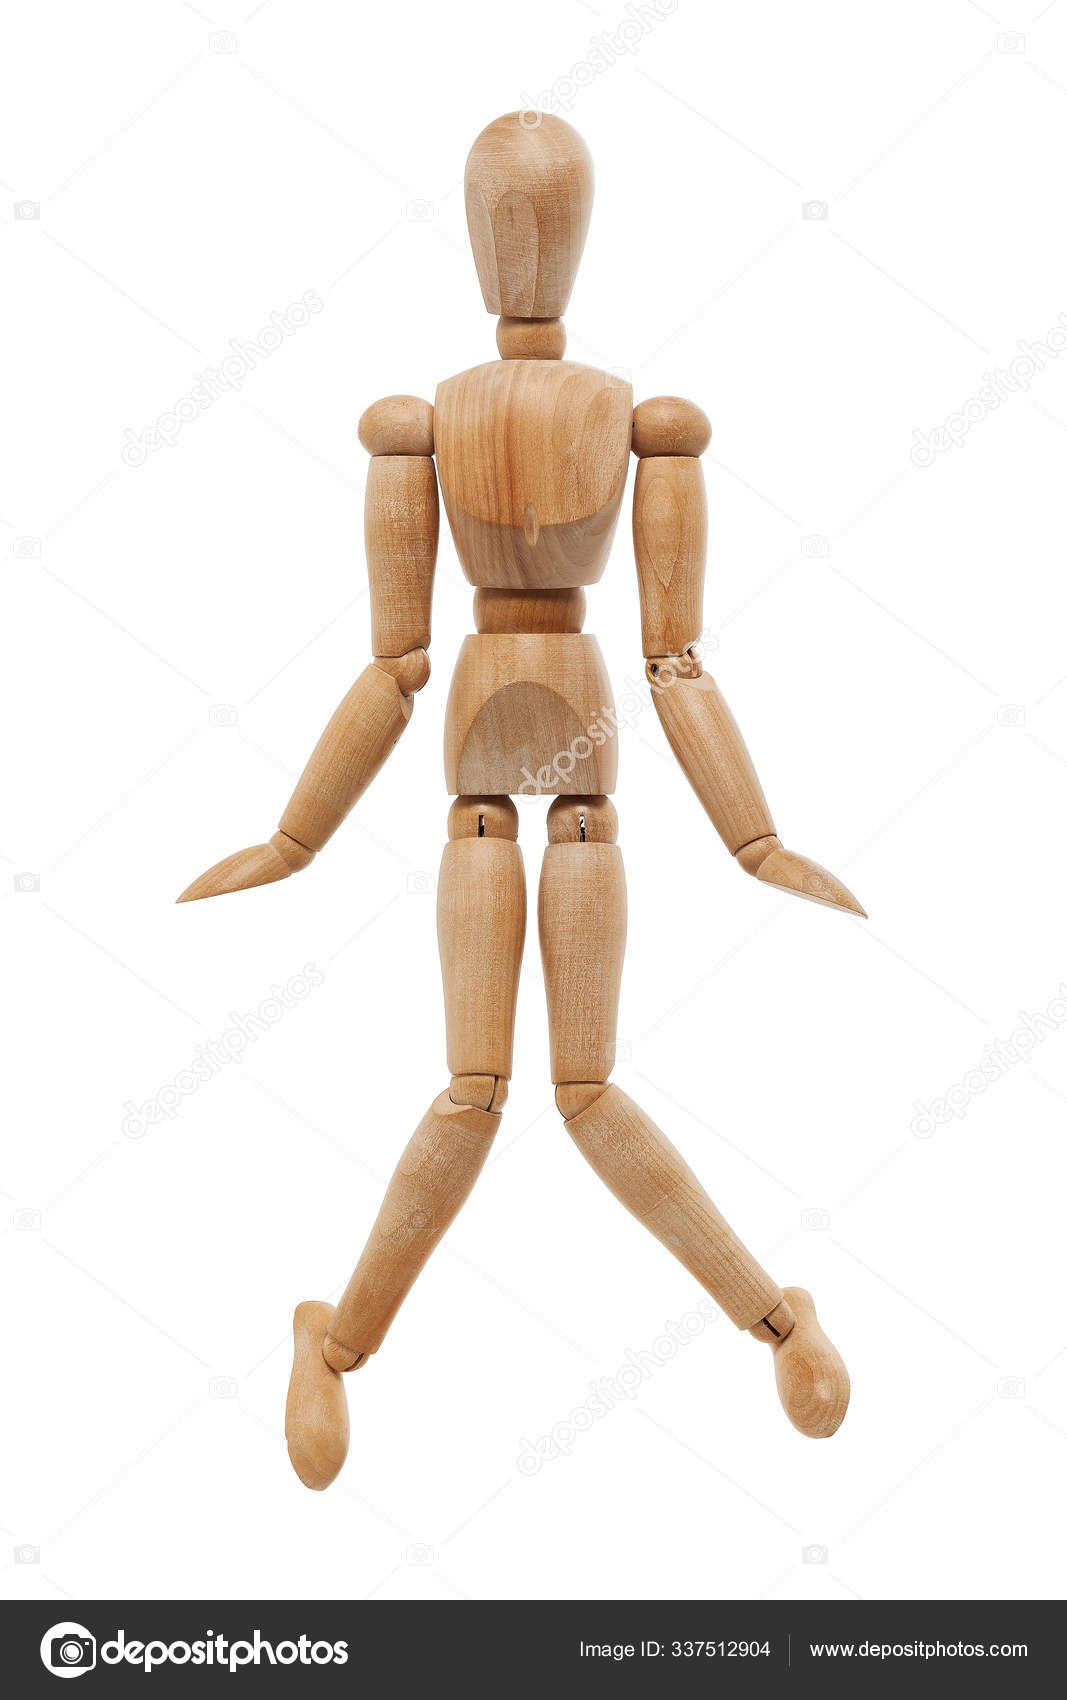 Wooden Mannequin With Walking Pose Stock Photo - Download Image